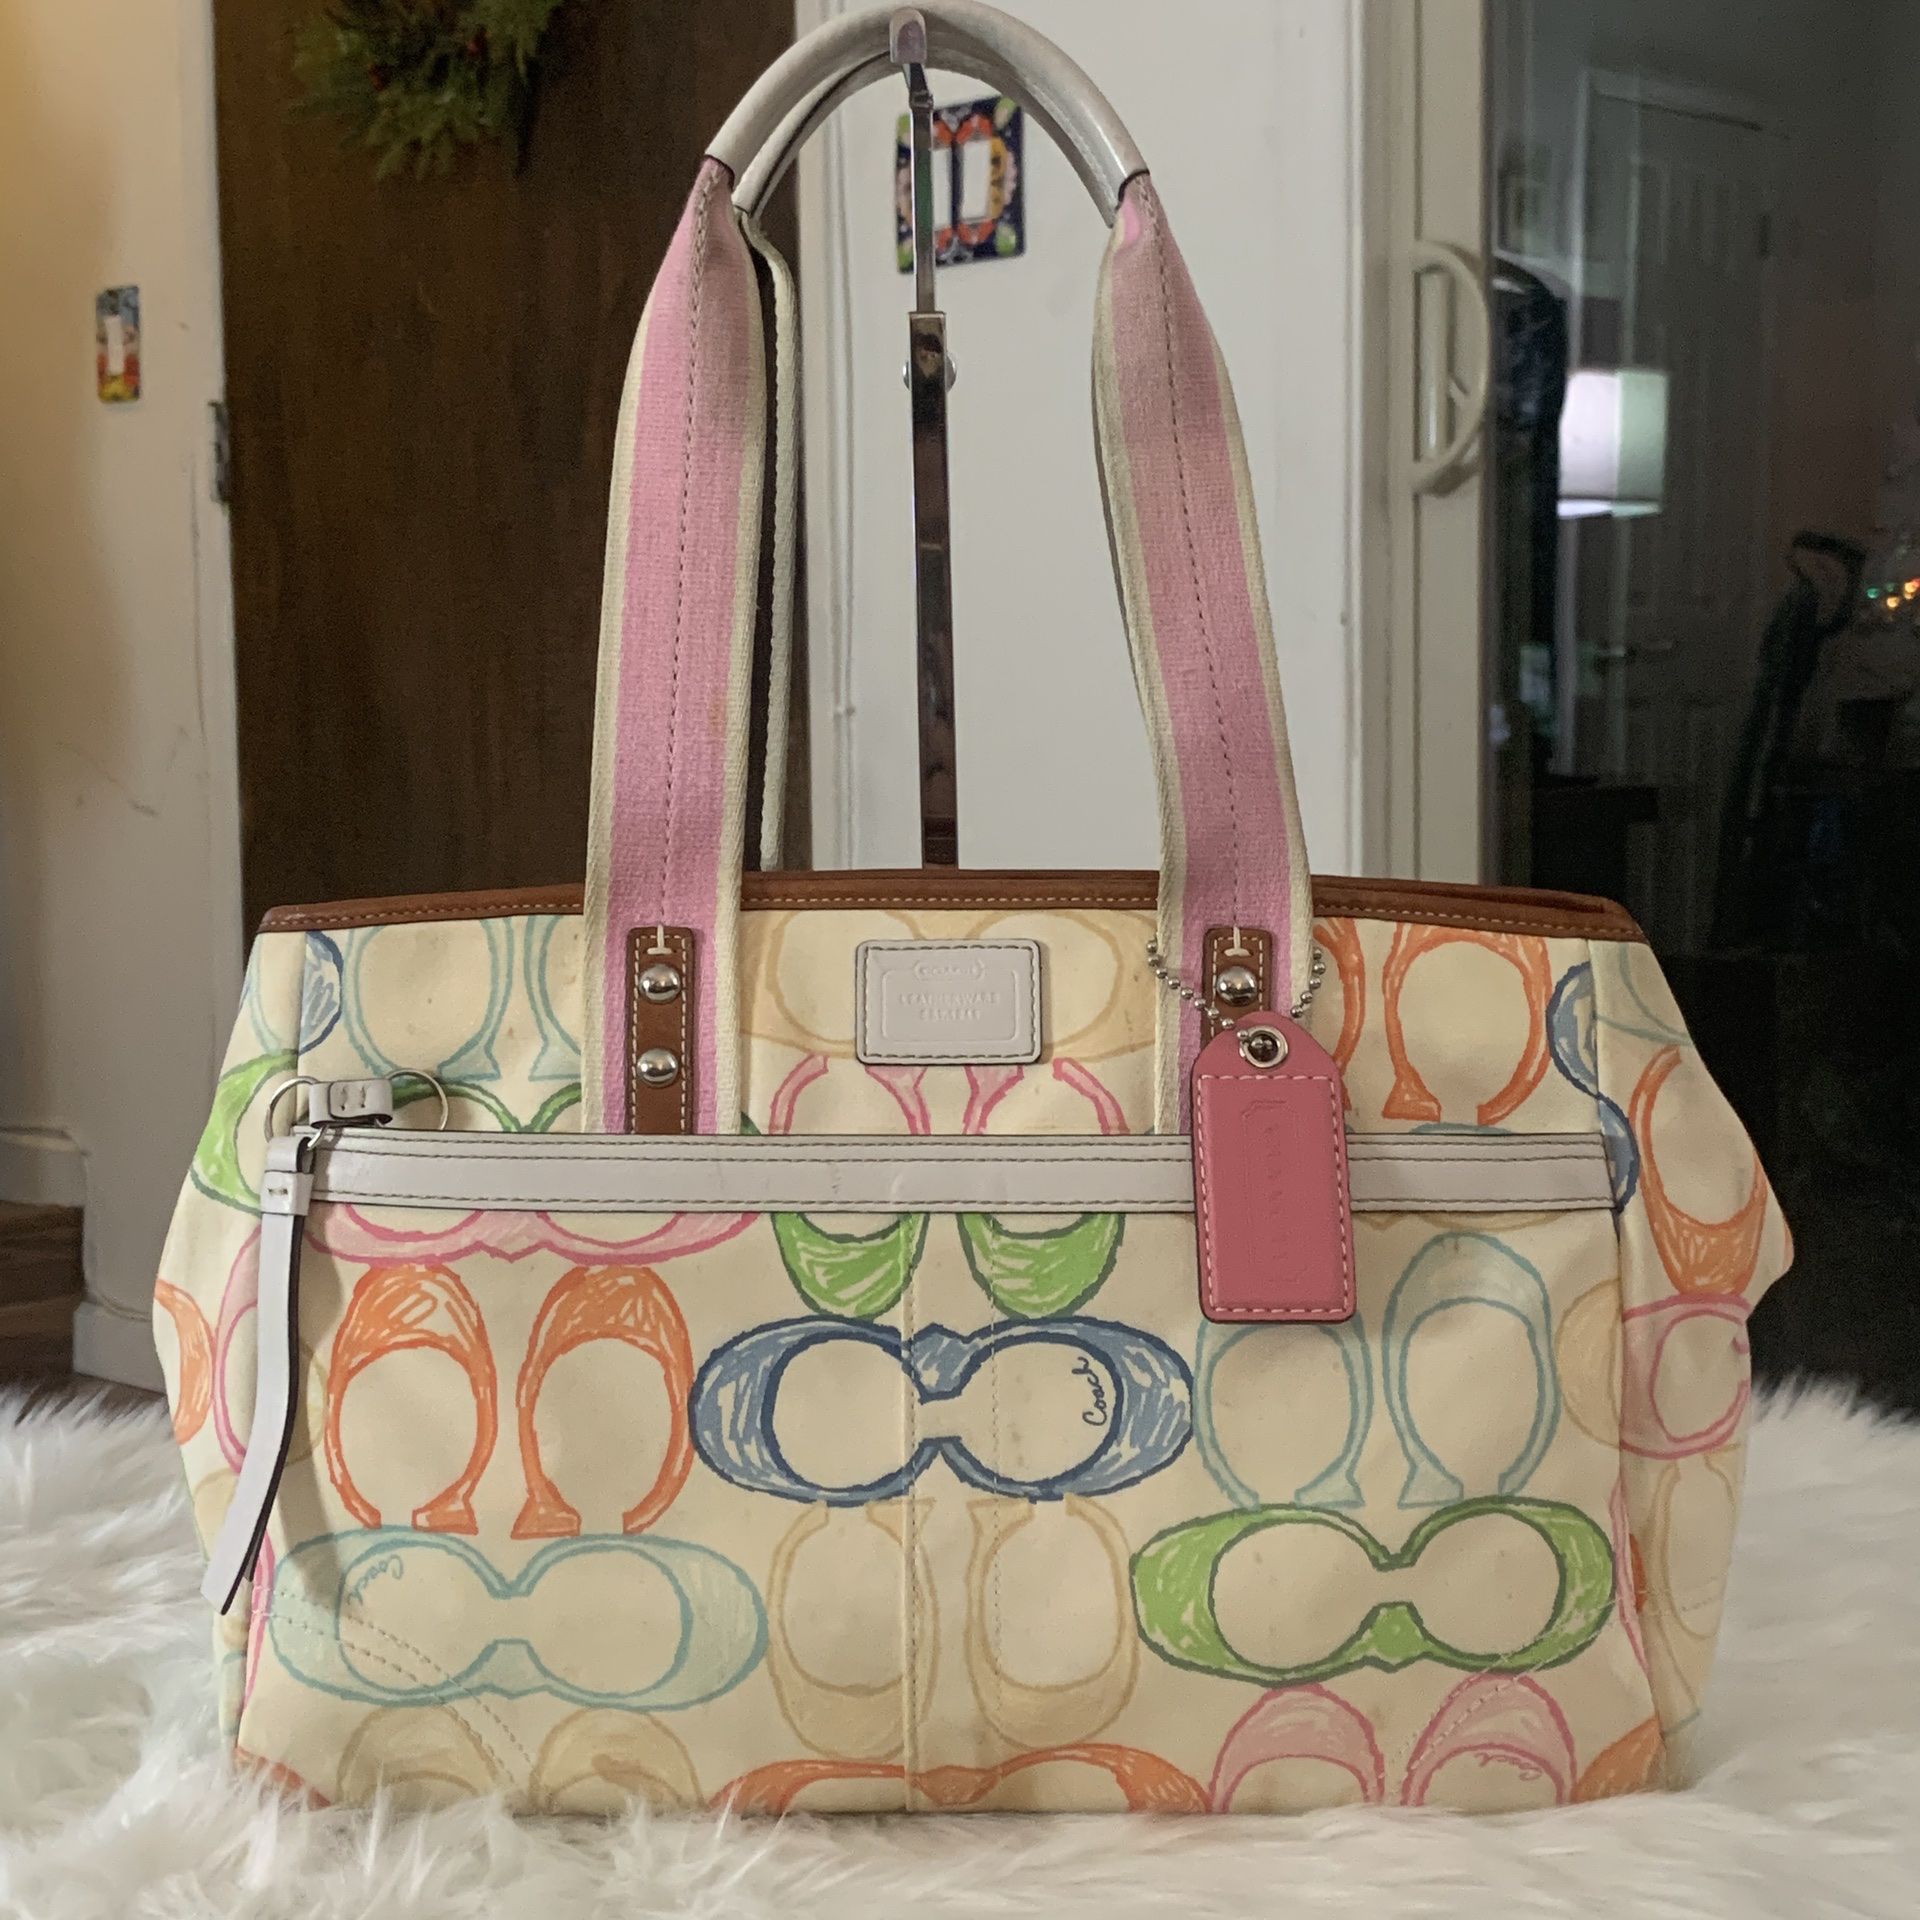 Coach Clear Tote for Sale in Lakewood, WA - OfferUp